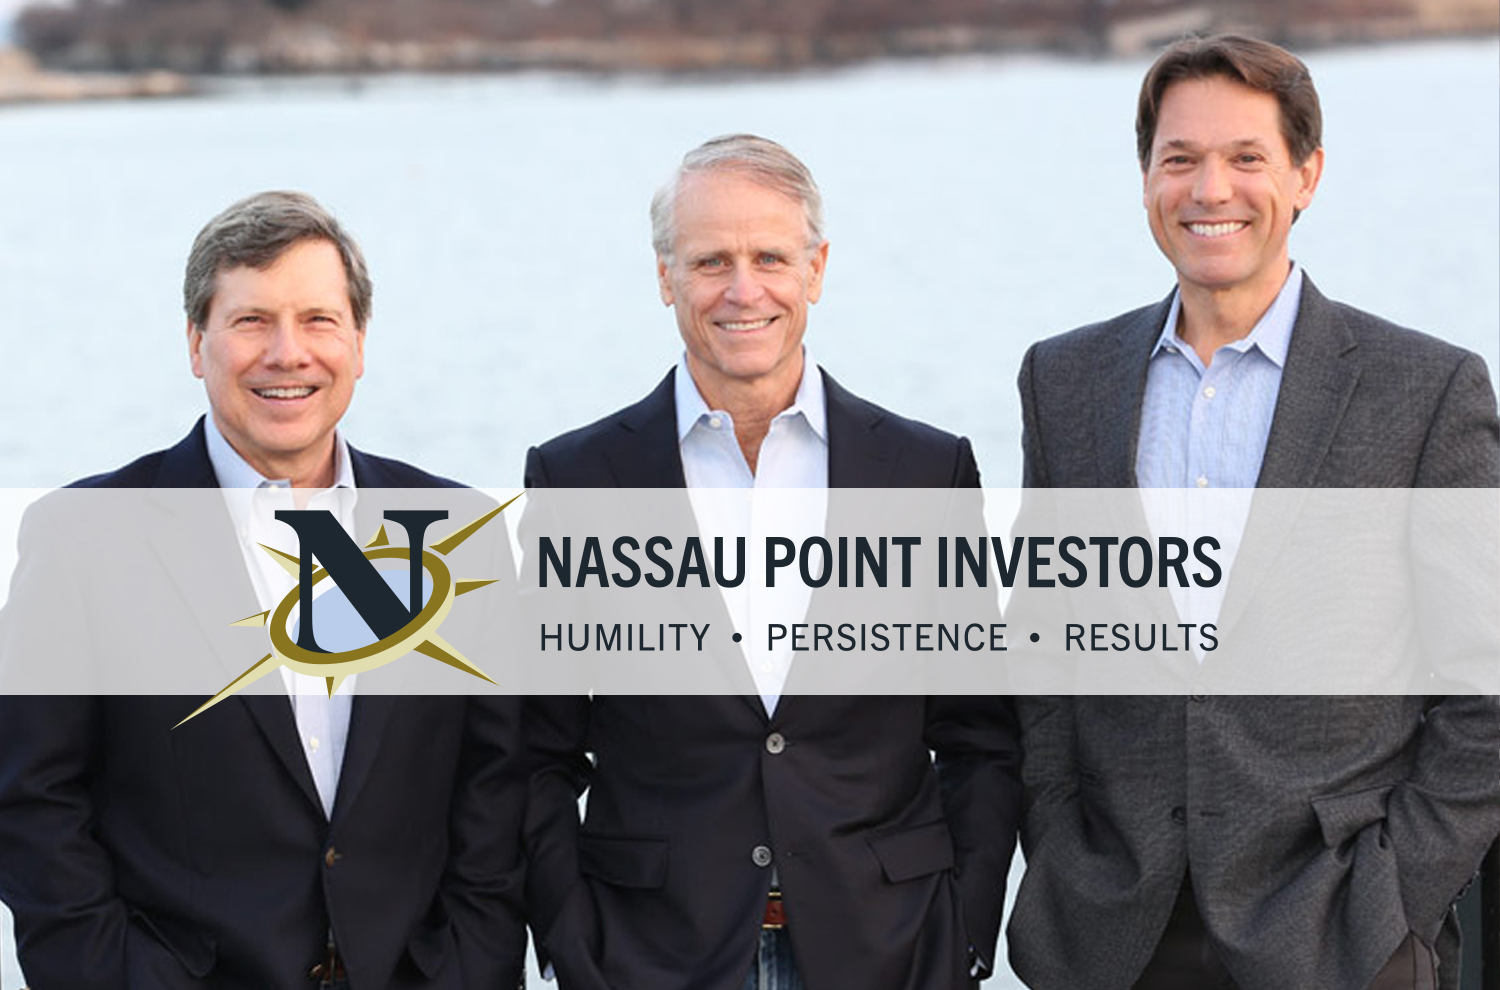 Three members of the Nassau Point Investment firm